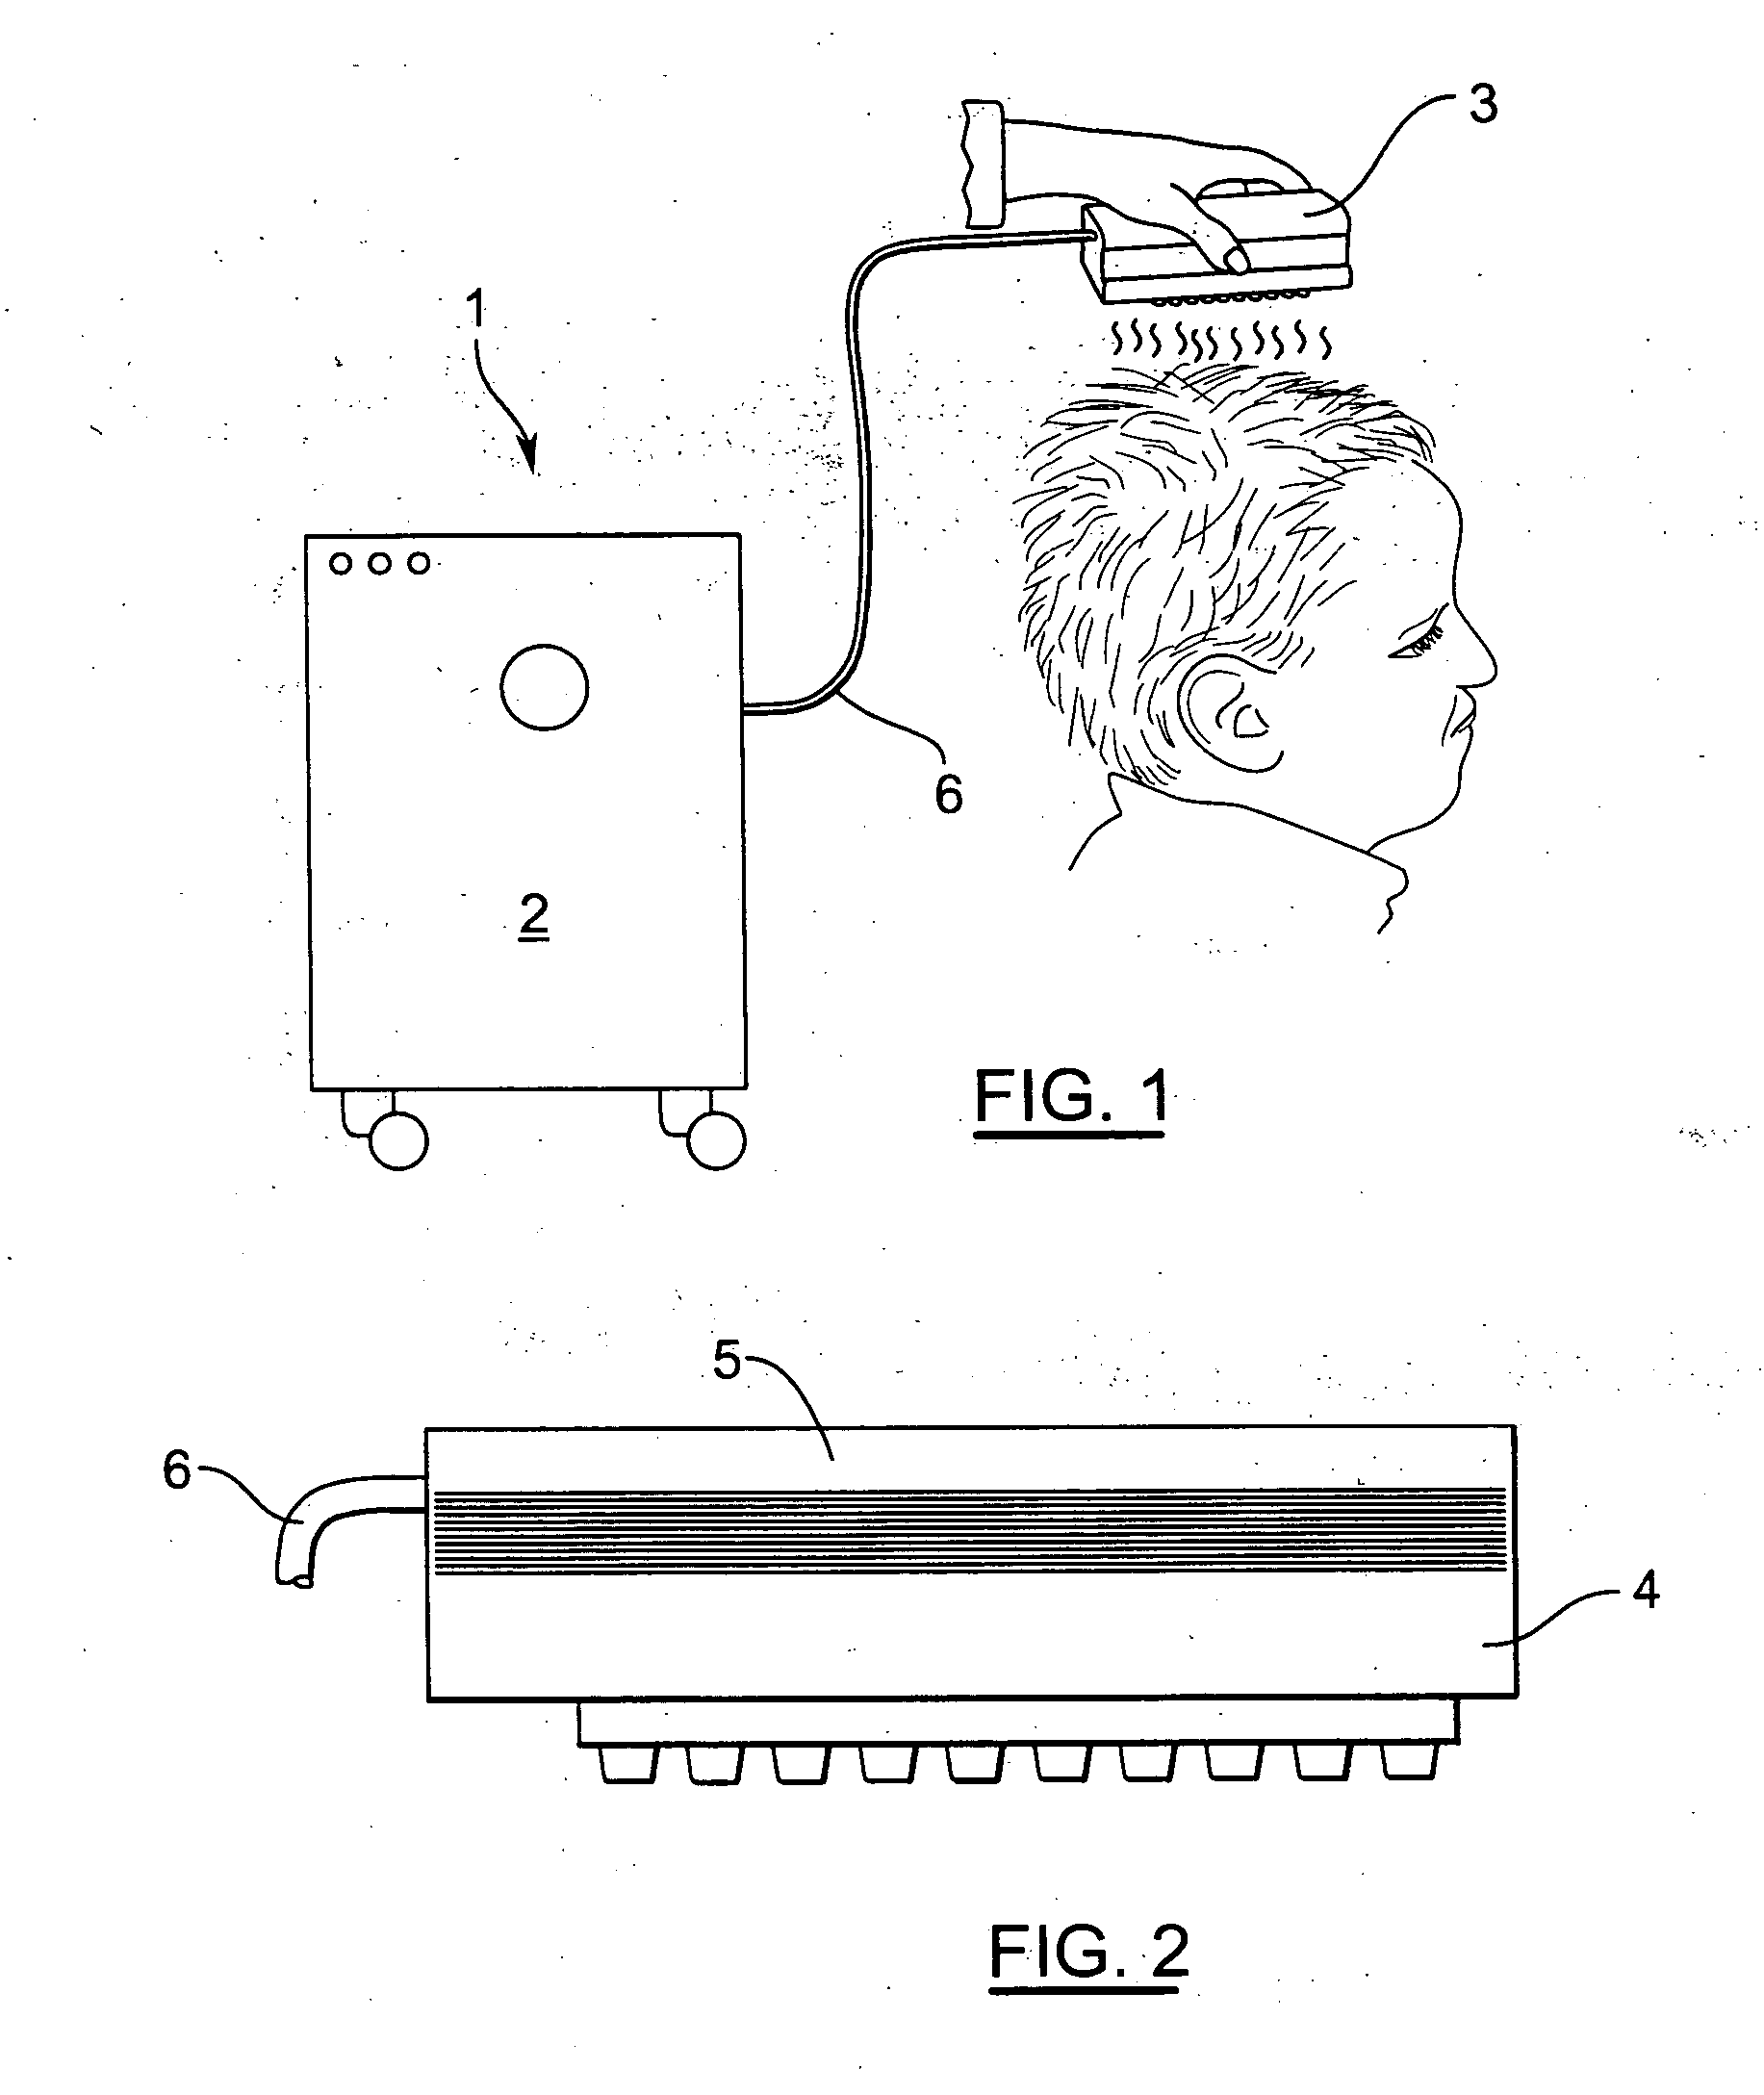 Apparatus for phototherapeutic treatment of skin disorders